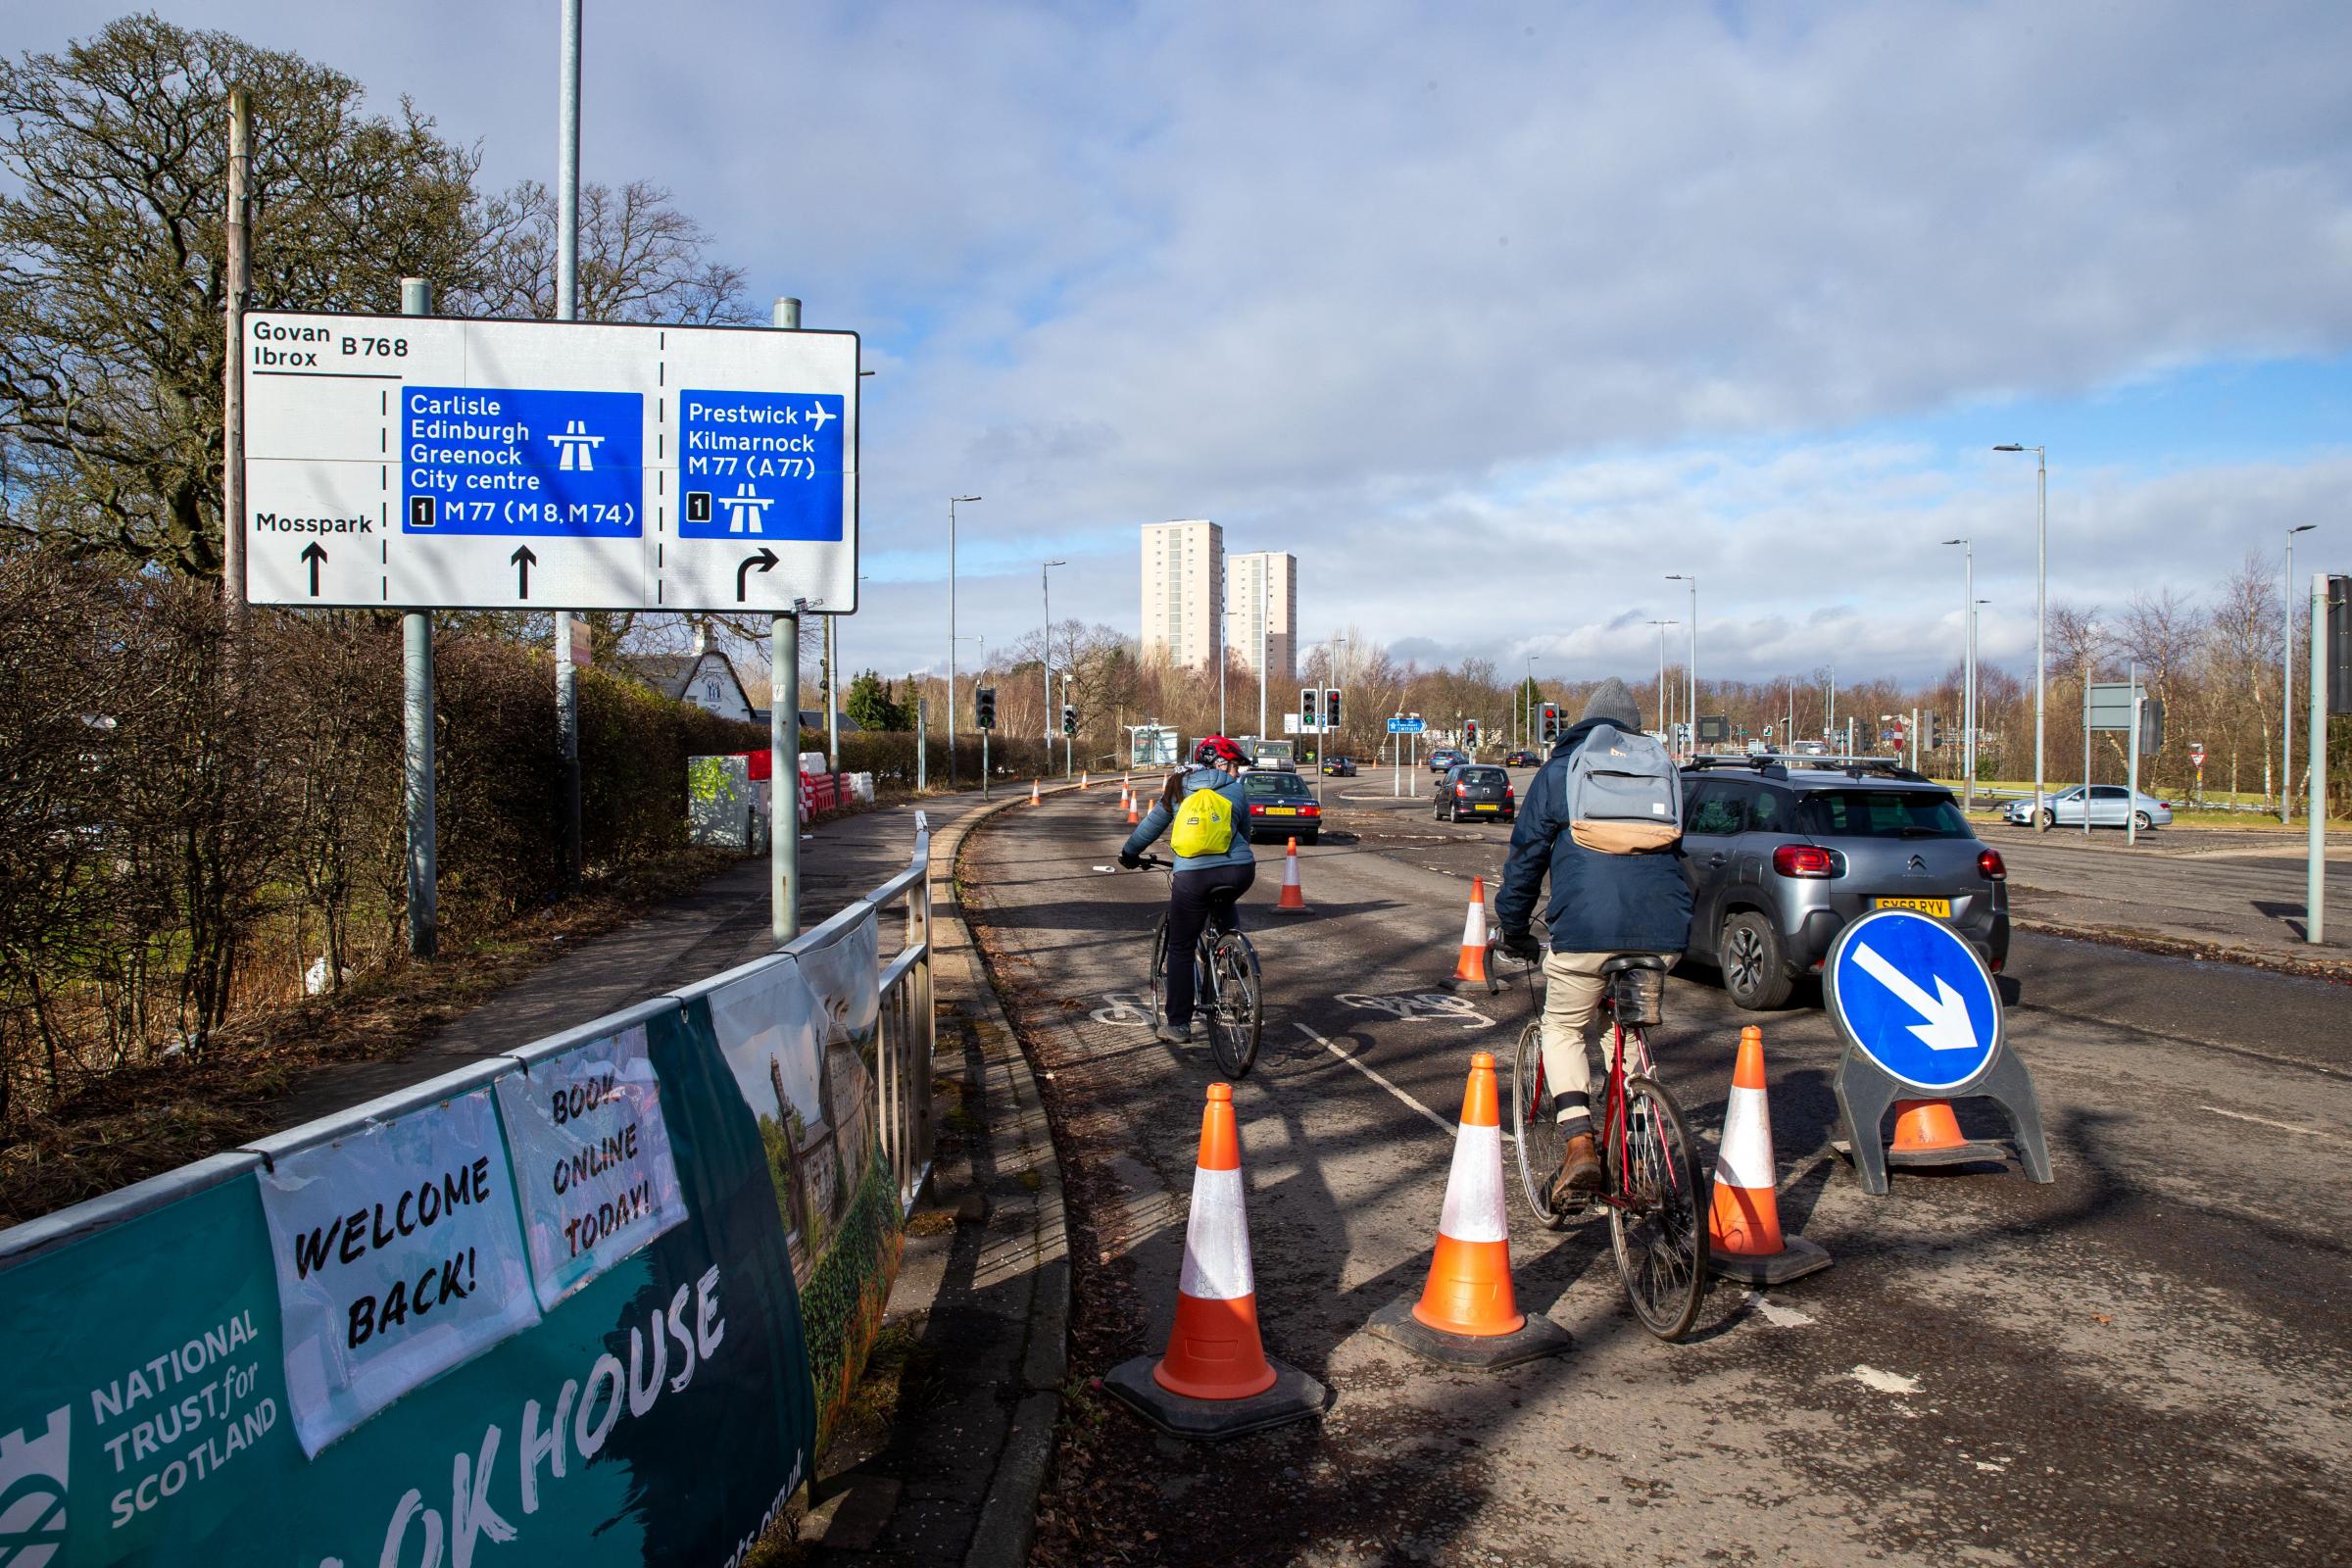 Cyclists pictured on Dumbreck Road near entrance to Pollok Park and M77 Picture: Colin Mearns